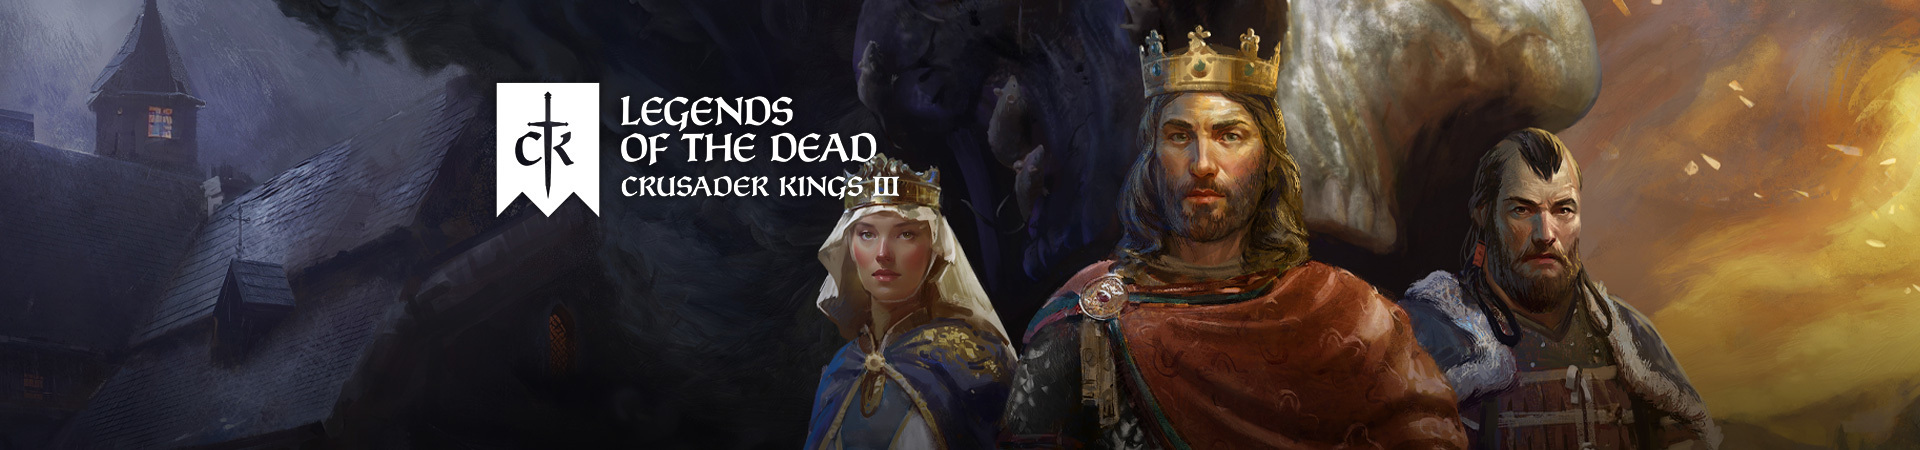 Crusader Kings III: Legends of the Dead - <b><img class="img-dk "  src="/images/icon-serialfor-steam.png" width="" height="" title="Buyers receive a key for Steam to redeem, install &amp; play" /><img class="img-lt "  src="/images/icon-serialfor-steam-lt.png" width="" height="" title="Buyers receive a key for Steam to redeem, install &amp; play" /></b><span> Now available</span>